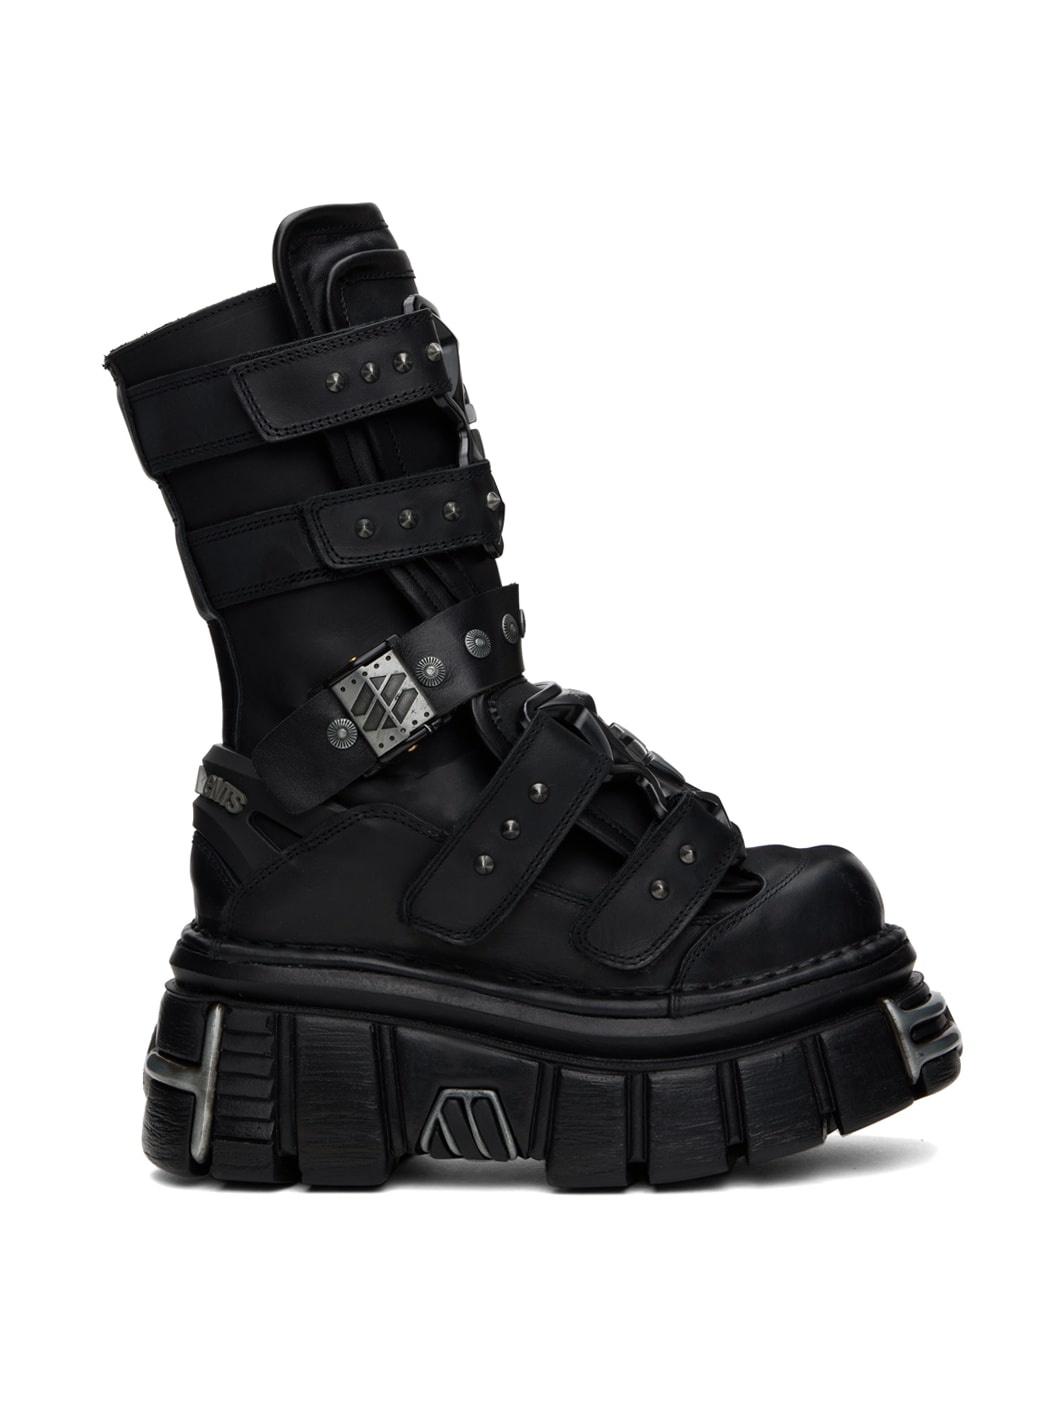 Black New Rock Edition Gamer Boots - 1